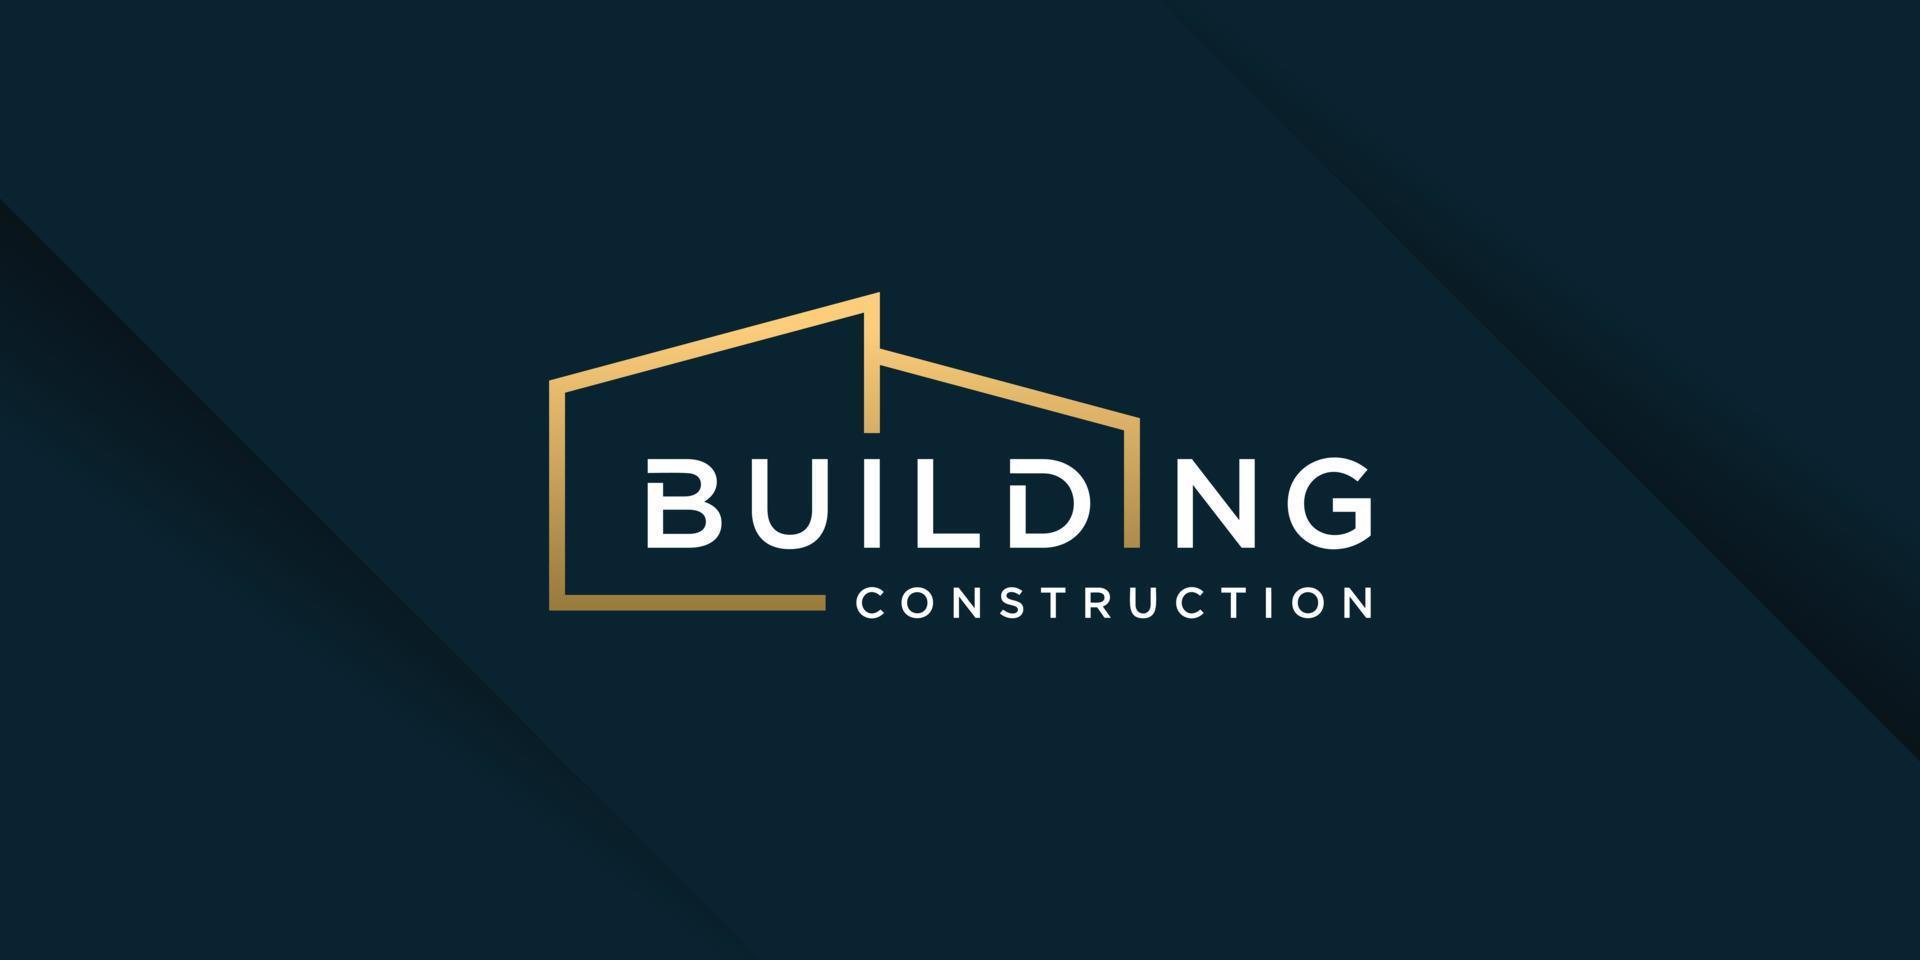 Buildng logo design with simple and creative concept vector